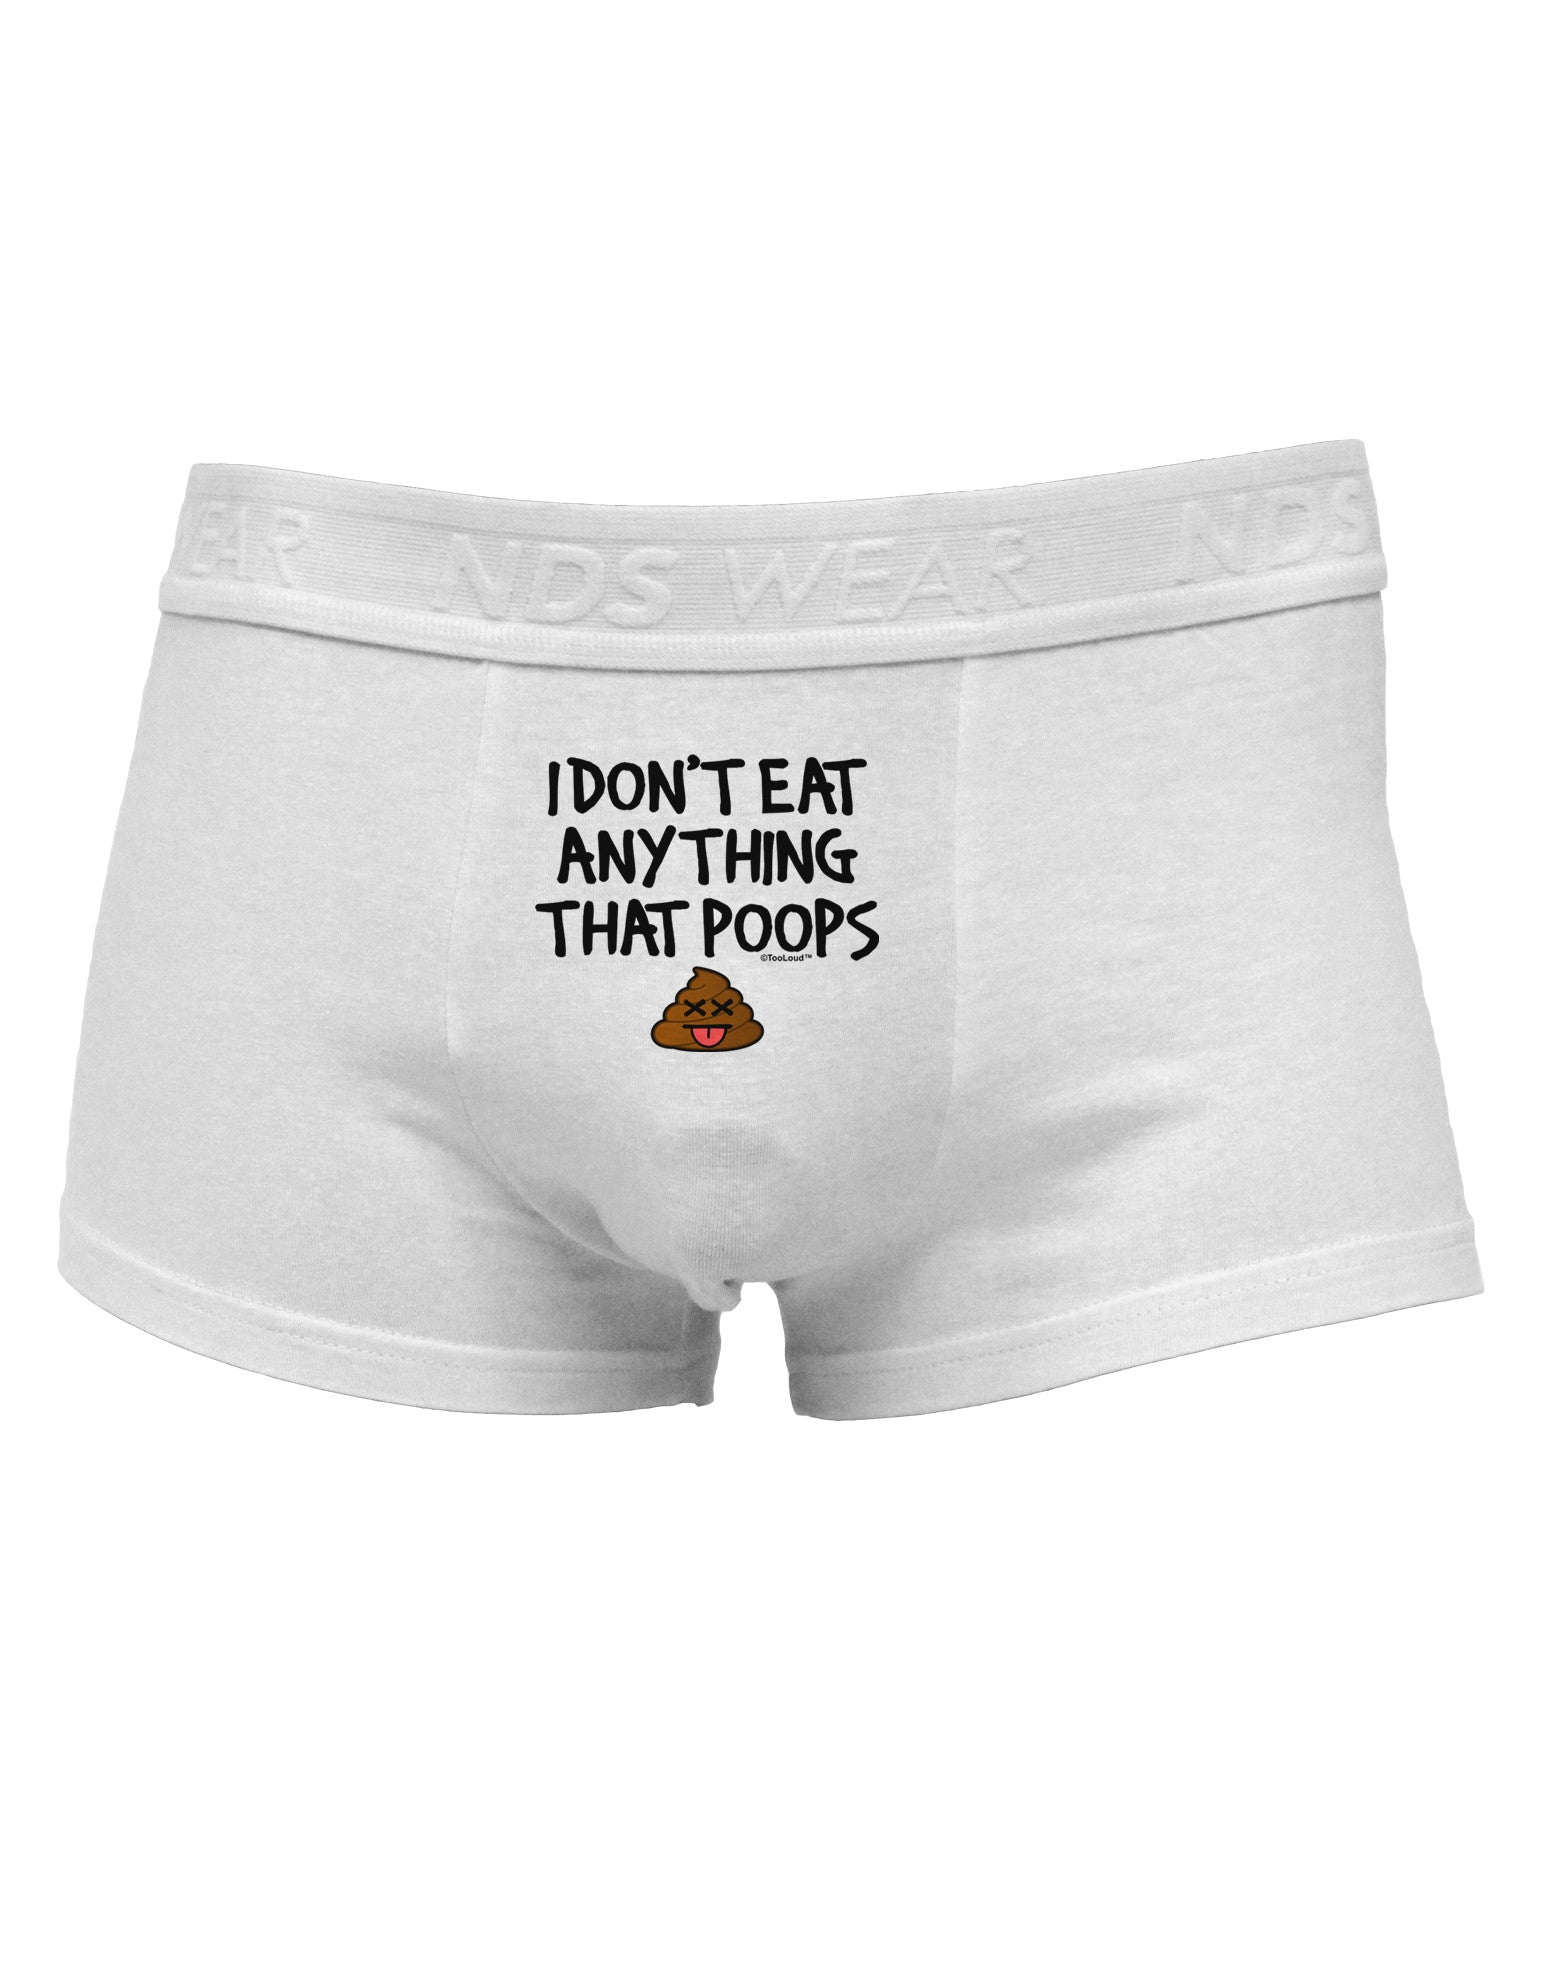 I Don't Eat Anything That Poops Mens Cotton Trunk Underwear